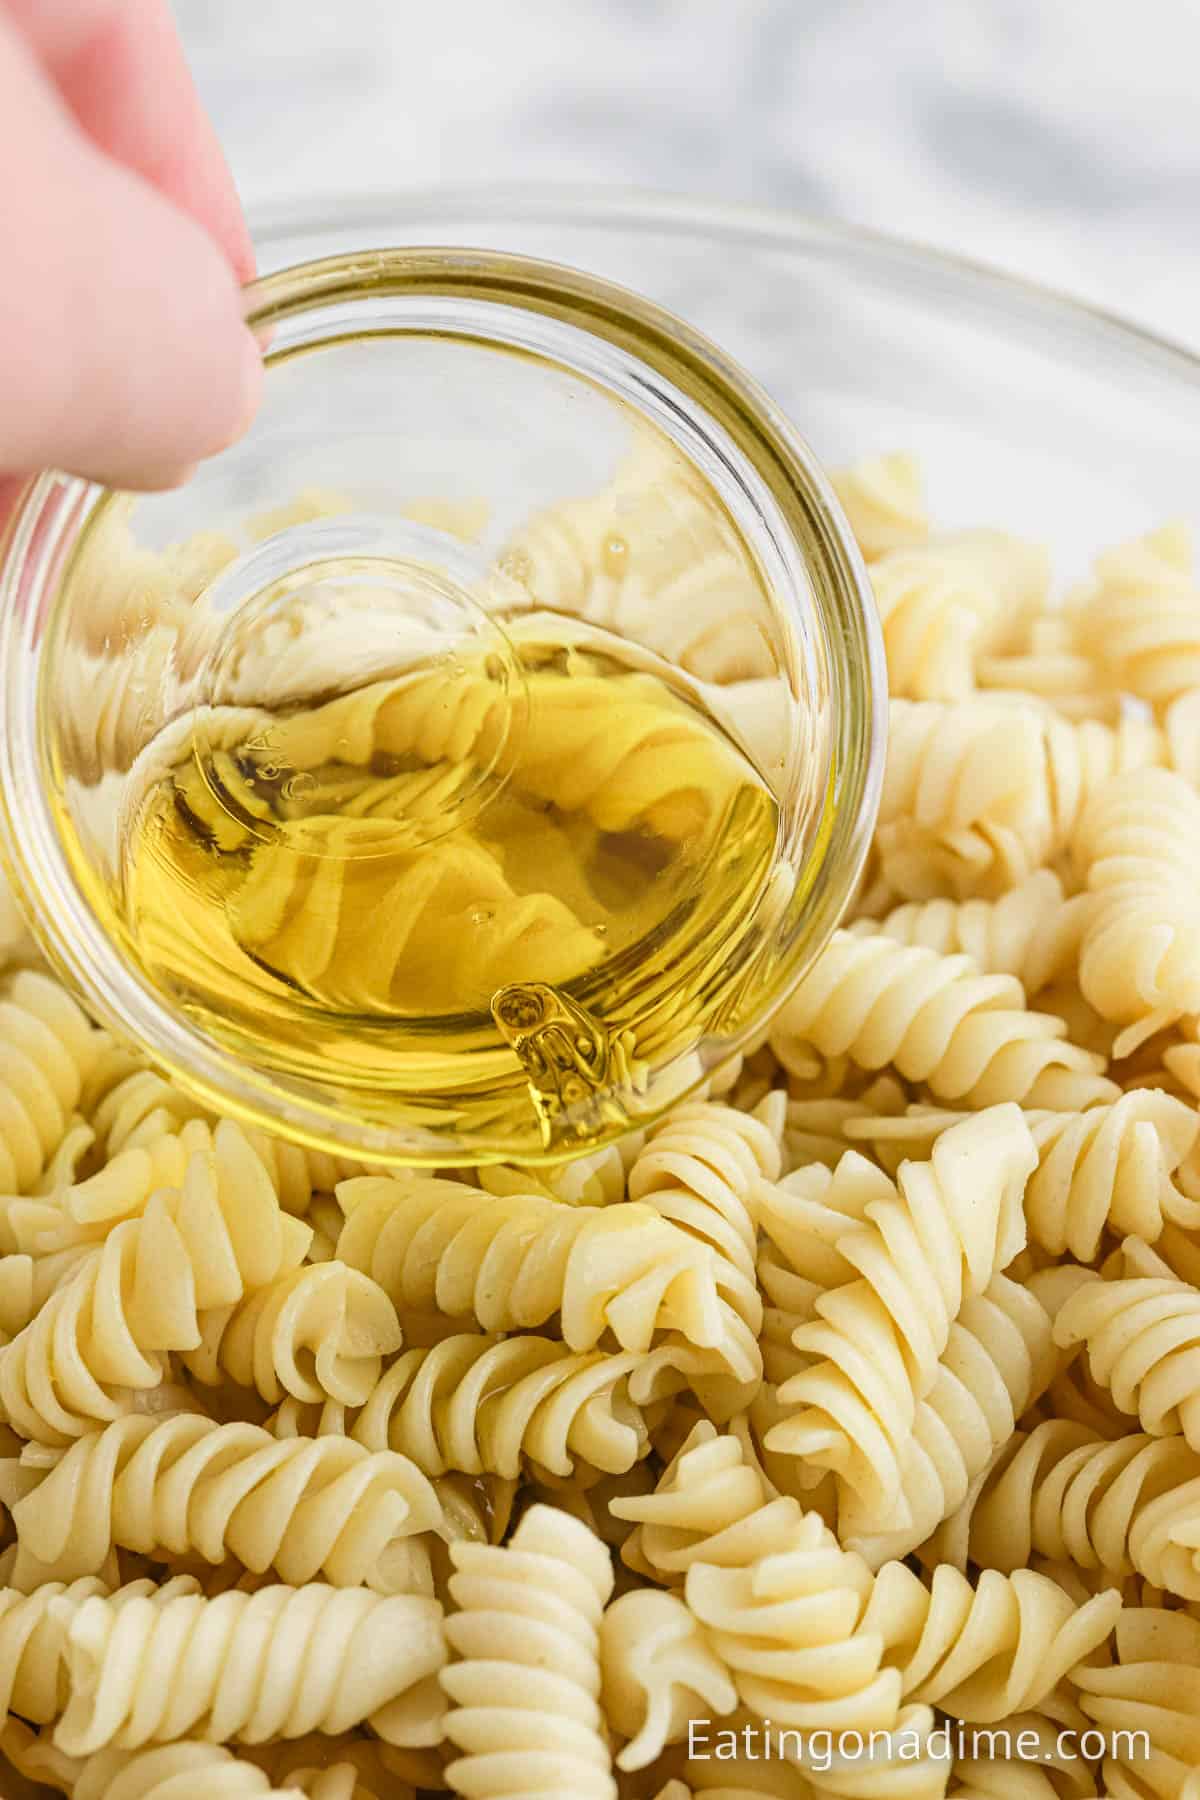 Pouring oil onto the cooked pasta